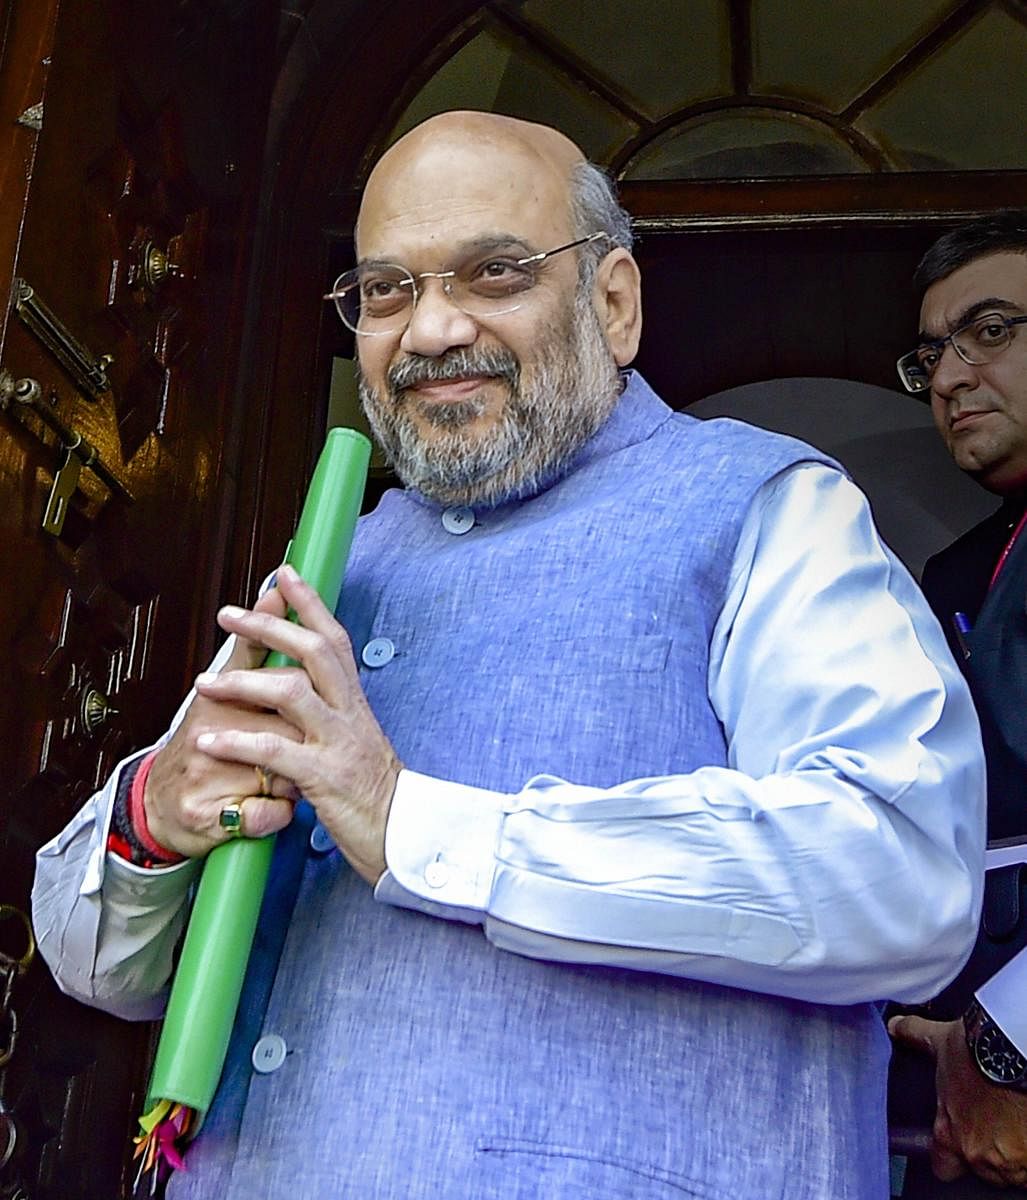 Prevent hoarding and black marketing of goods amid lockdown: Amit Shah directs authorities